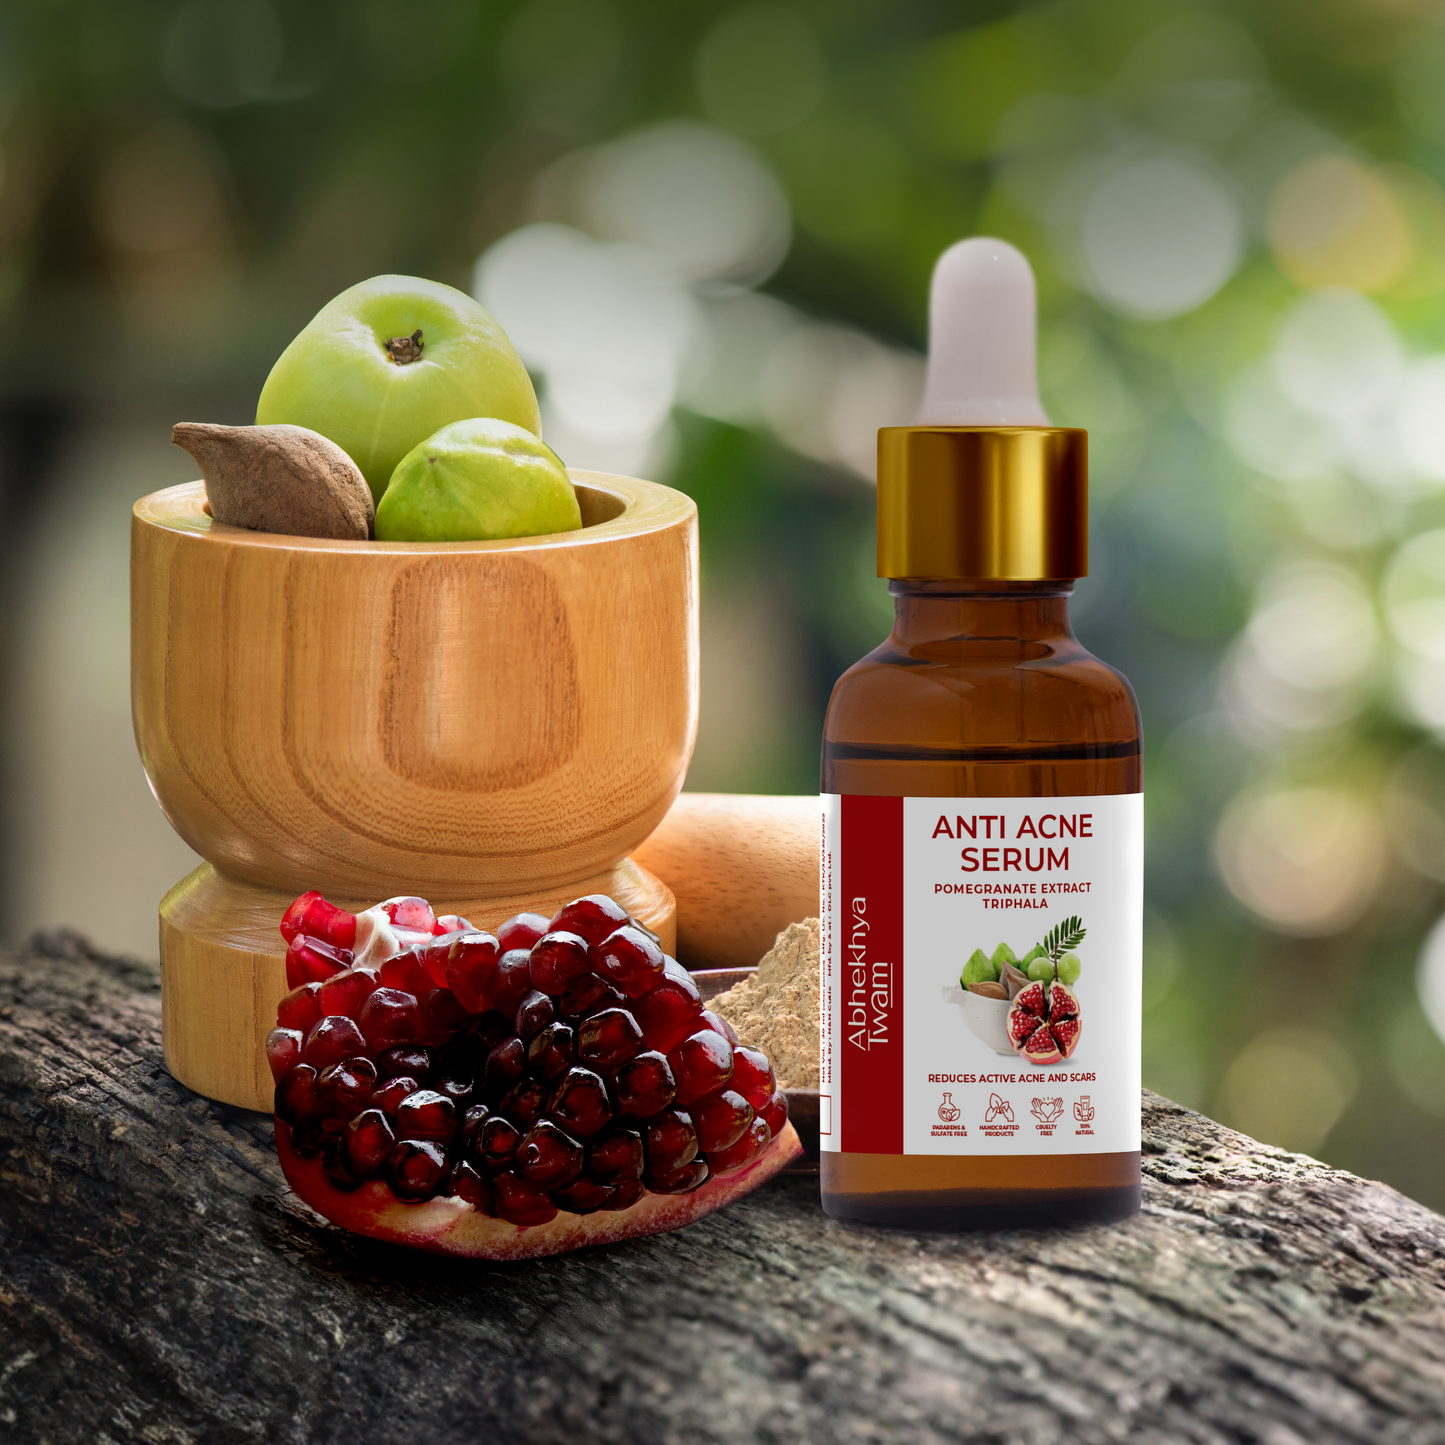 Anti-Acne Serum with Triphala and Pomegranate